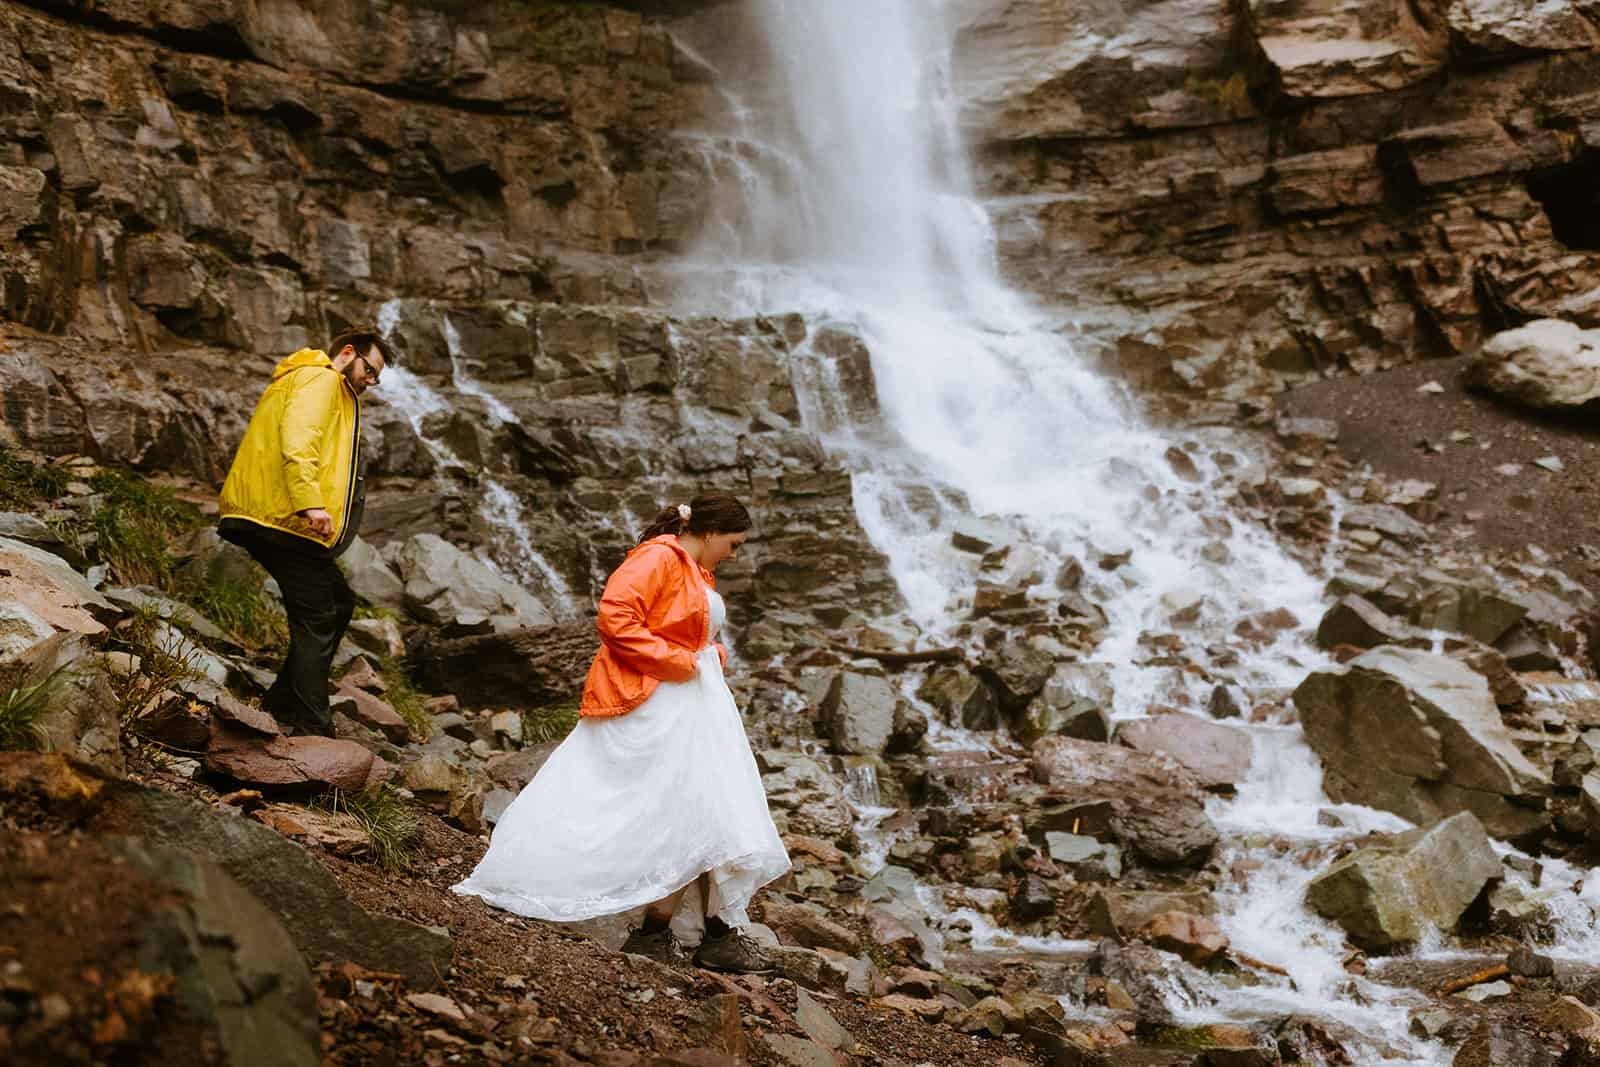 A woman holds up her wedding dress as she walks through the rocks underneath a Cascading waterfall in Ouray